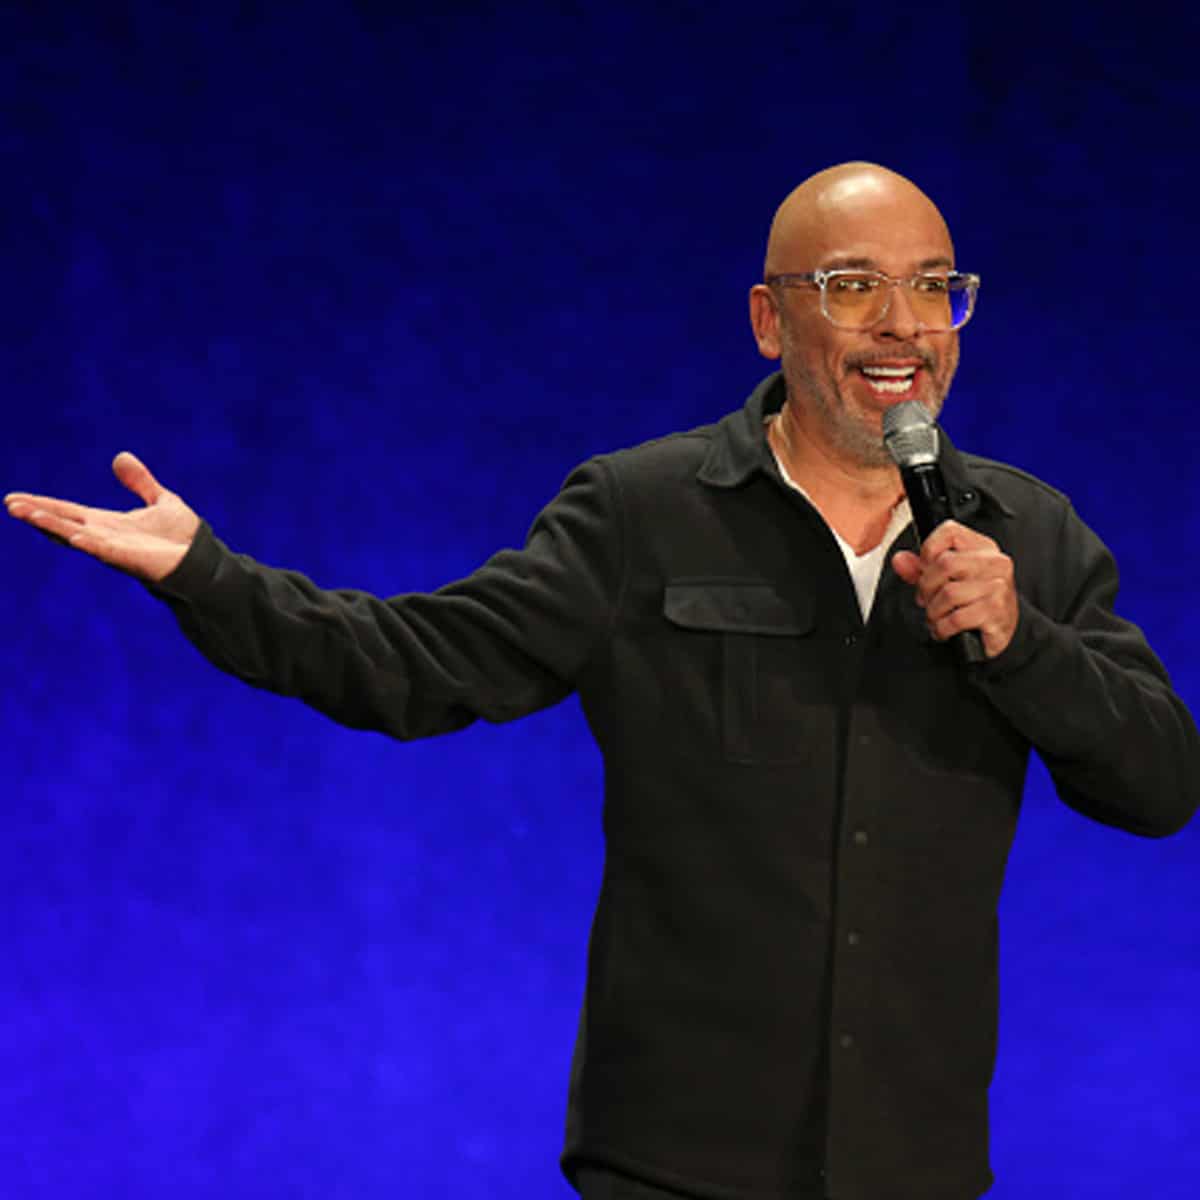 Jo Koy speaks about his upcoming movie "Easter Sunday" during Universal Pictures and Focus Features special presentation